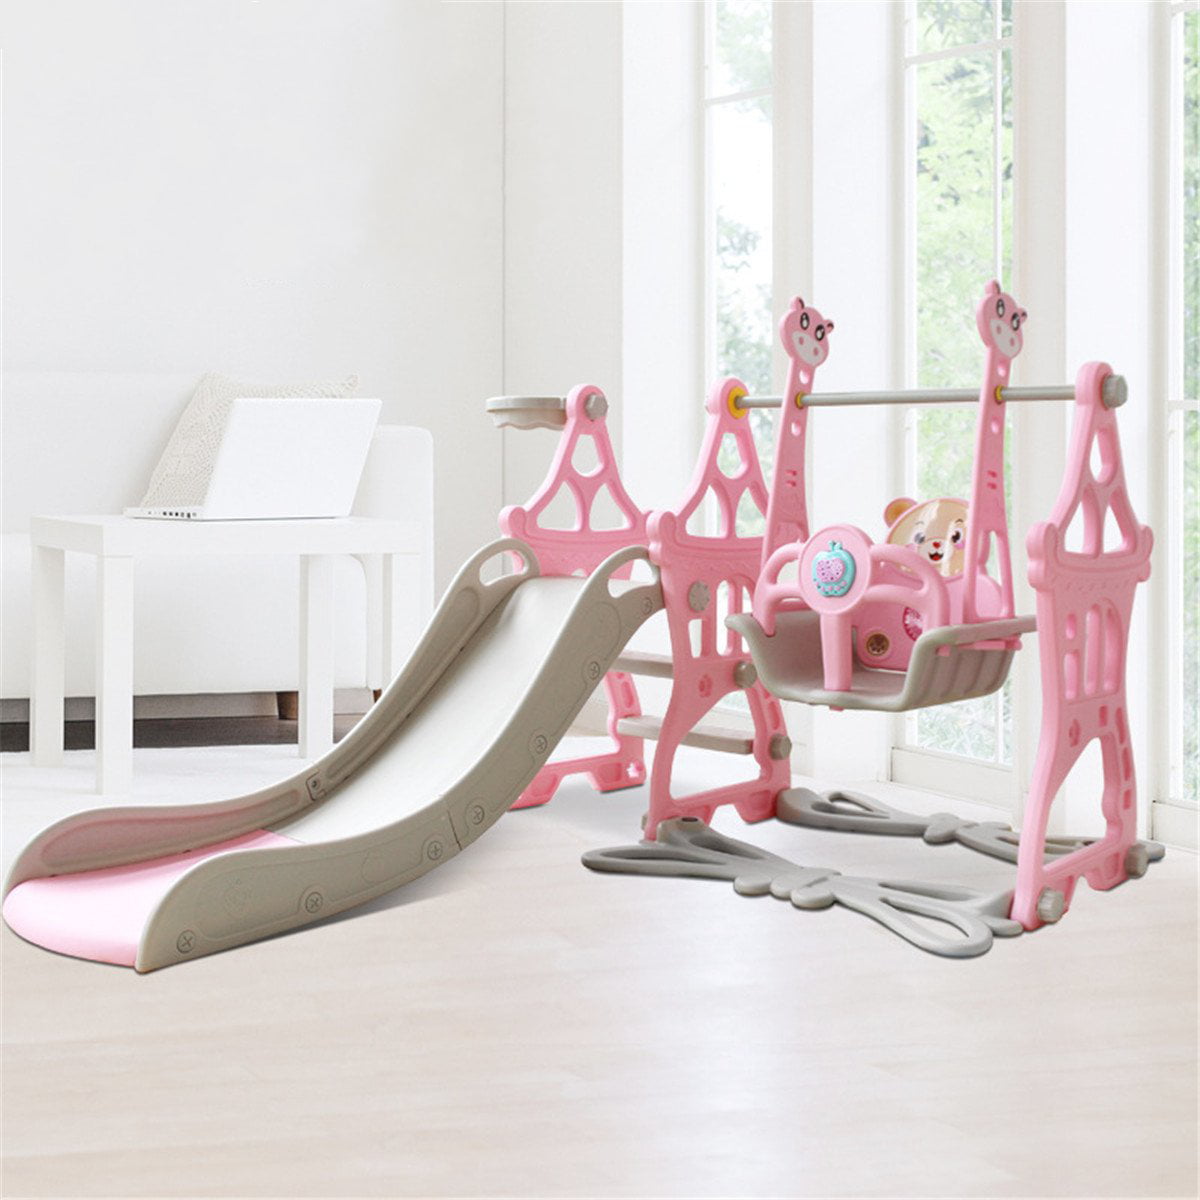 3-in-1 Baby Kid Playset Slide and Swing Set for Toddlers, Play Climber ...